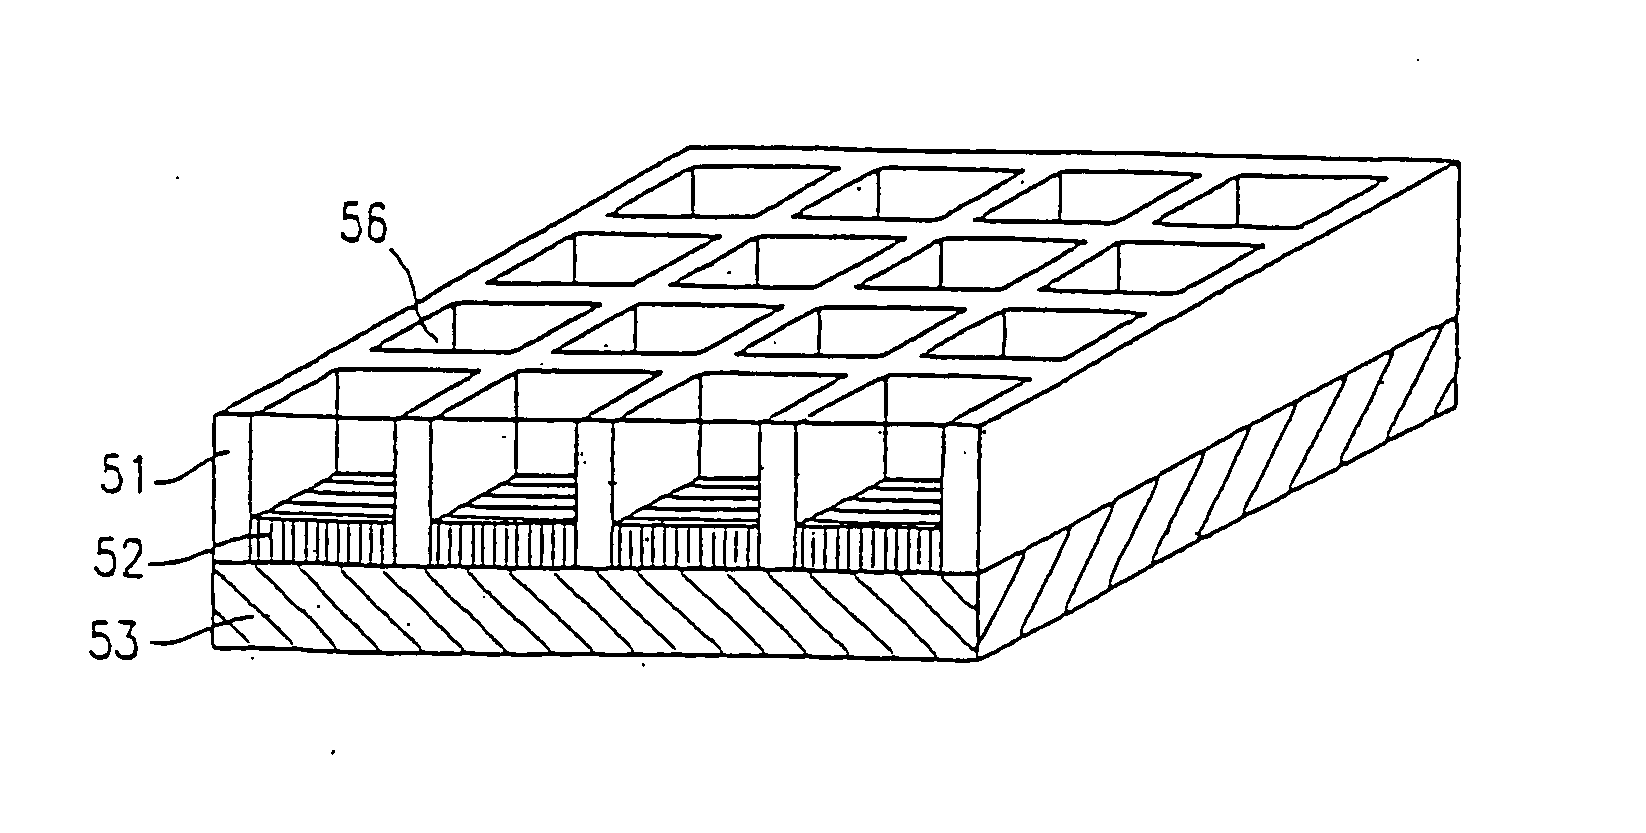 Transmissive or reflective liquid crystal display and process for its manufacture